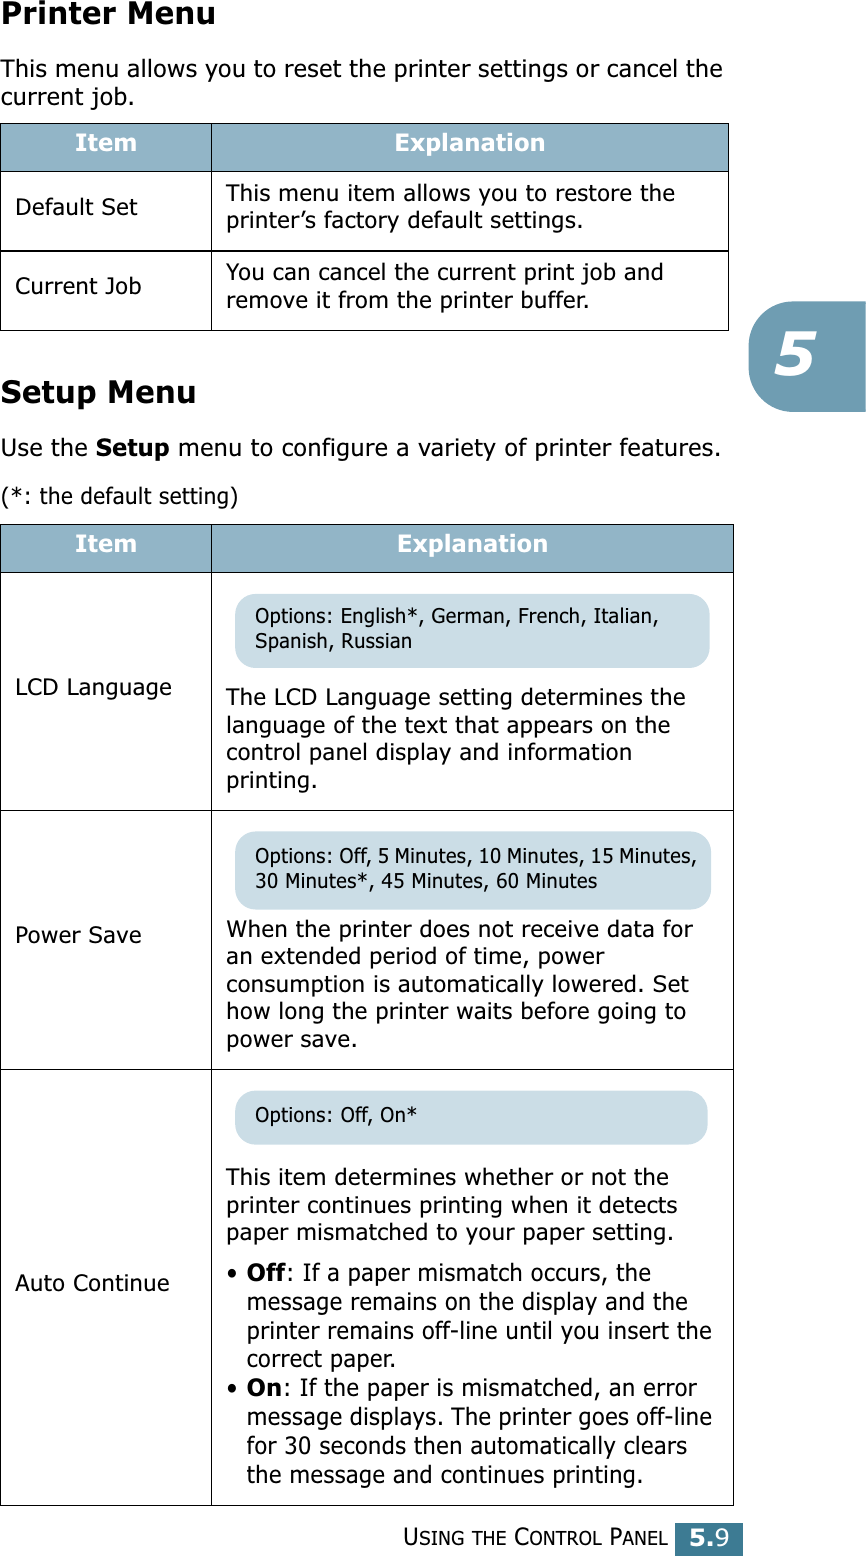 USING THE CONTROL PANEL5.955Printer MenuThis menu allows you to reset the printer settings or cancel the current job.Setup MenuUse the Setup menu to configure a variety of printer features.(*: the default setting)Item ExplanationDefault Set This menu item allows you to restore the printer’s factory default settings.Current Job You can cancel the current print job and remove it from the printer buffer.Item ExplanationLCD Language The LCD Language setting determines the language of the text that appears on the control panel display and information printing.Power Save When the printer does not receive data for an extended period of time, power consumption is automatically lowered. Set how long the printer waits before going to power save.Auto ContinueThis item determines whether or not the printer continues printing when it detects paper mismatched to your paper setting. •Off: If a paper mismatch occurs, the message remains on the display and the printer remains off-line until you insert the correct paper.•On: If the paper is mismatched, an error message displays. The printer goes off-line for 30 seconds then automatically clears the message and continues printing. Options: English*, German, French, Italian, Spanish, RussianOptions: Off, 5 Minutes, 10 Minutes, 15 Minutes, 30 Minutes*, 45 Minutes, 60 MinutesOptions: Off, On*